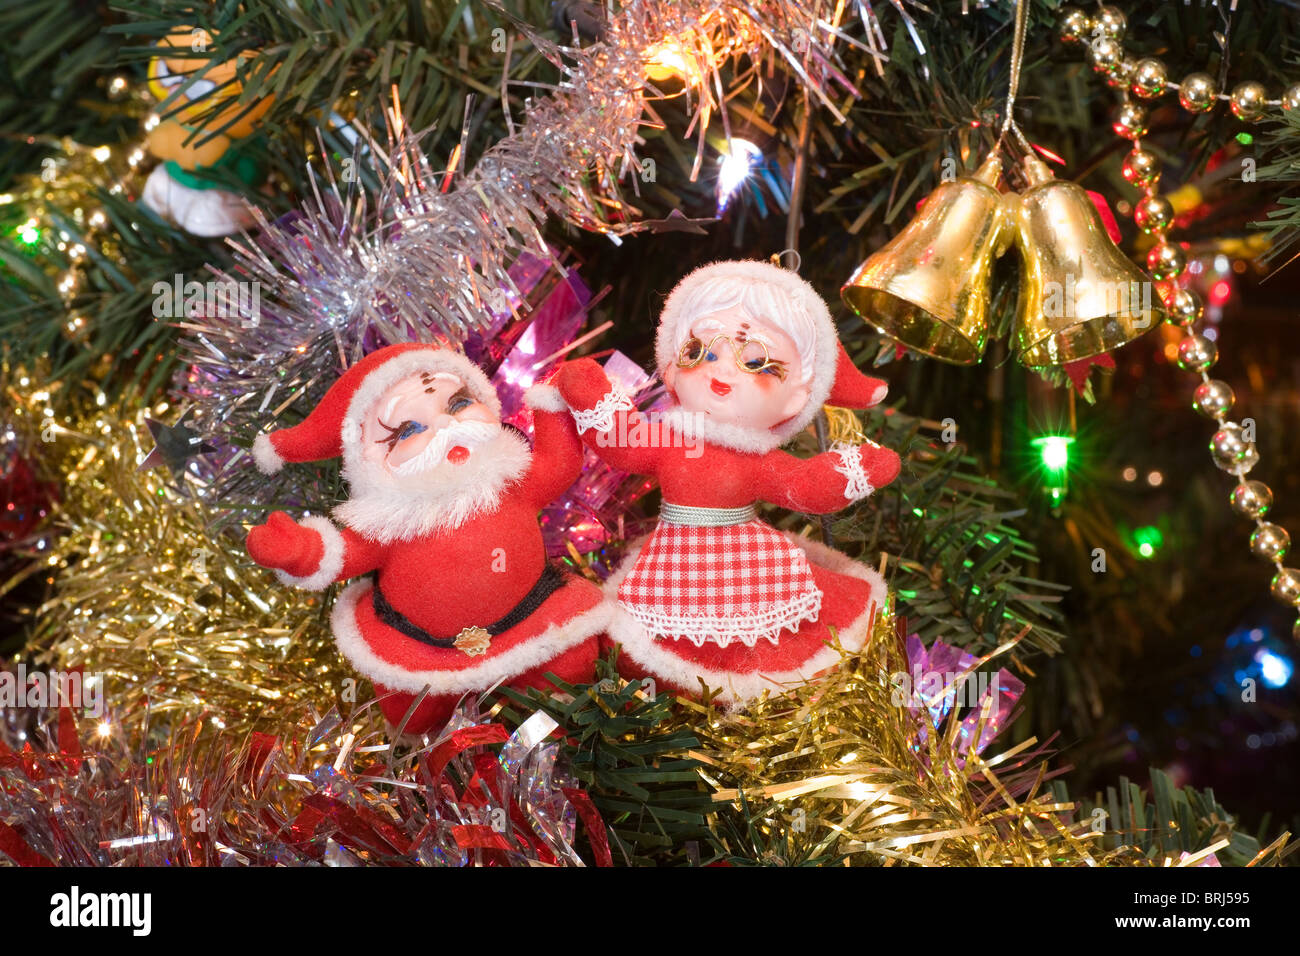 Mr. and Mrs. Santa Claus figures on a Christmas tree Stock Photo